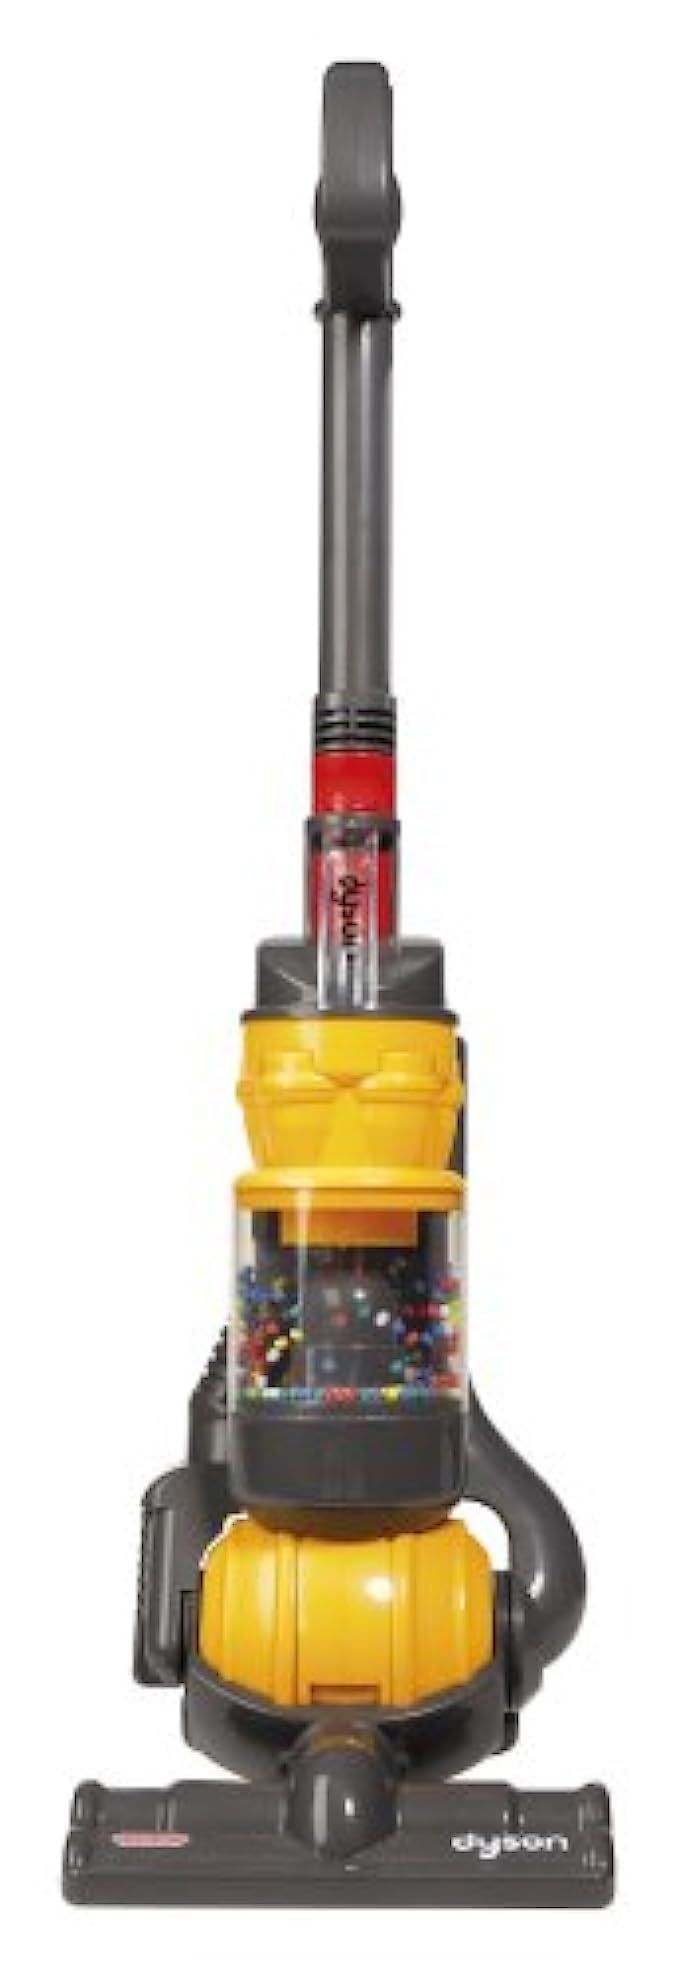 Casdon - Dyson Ball Vacuum with real suction and sounds - Toy Vacuum | Amazon (US)